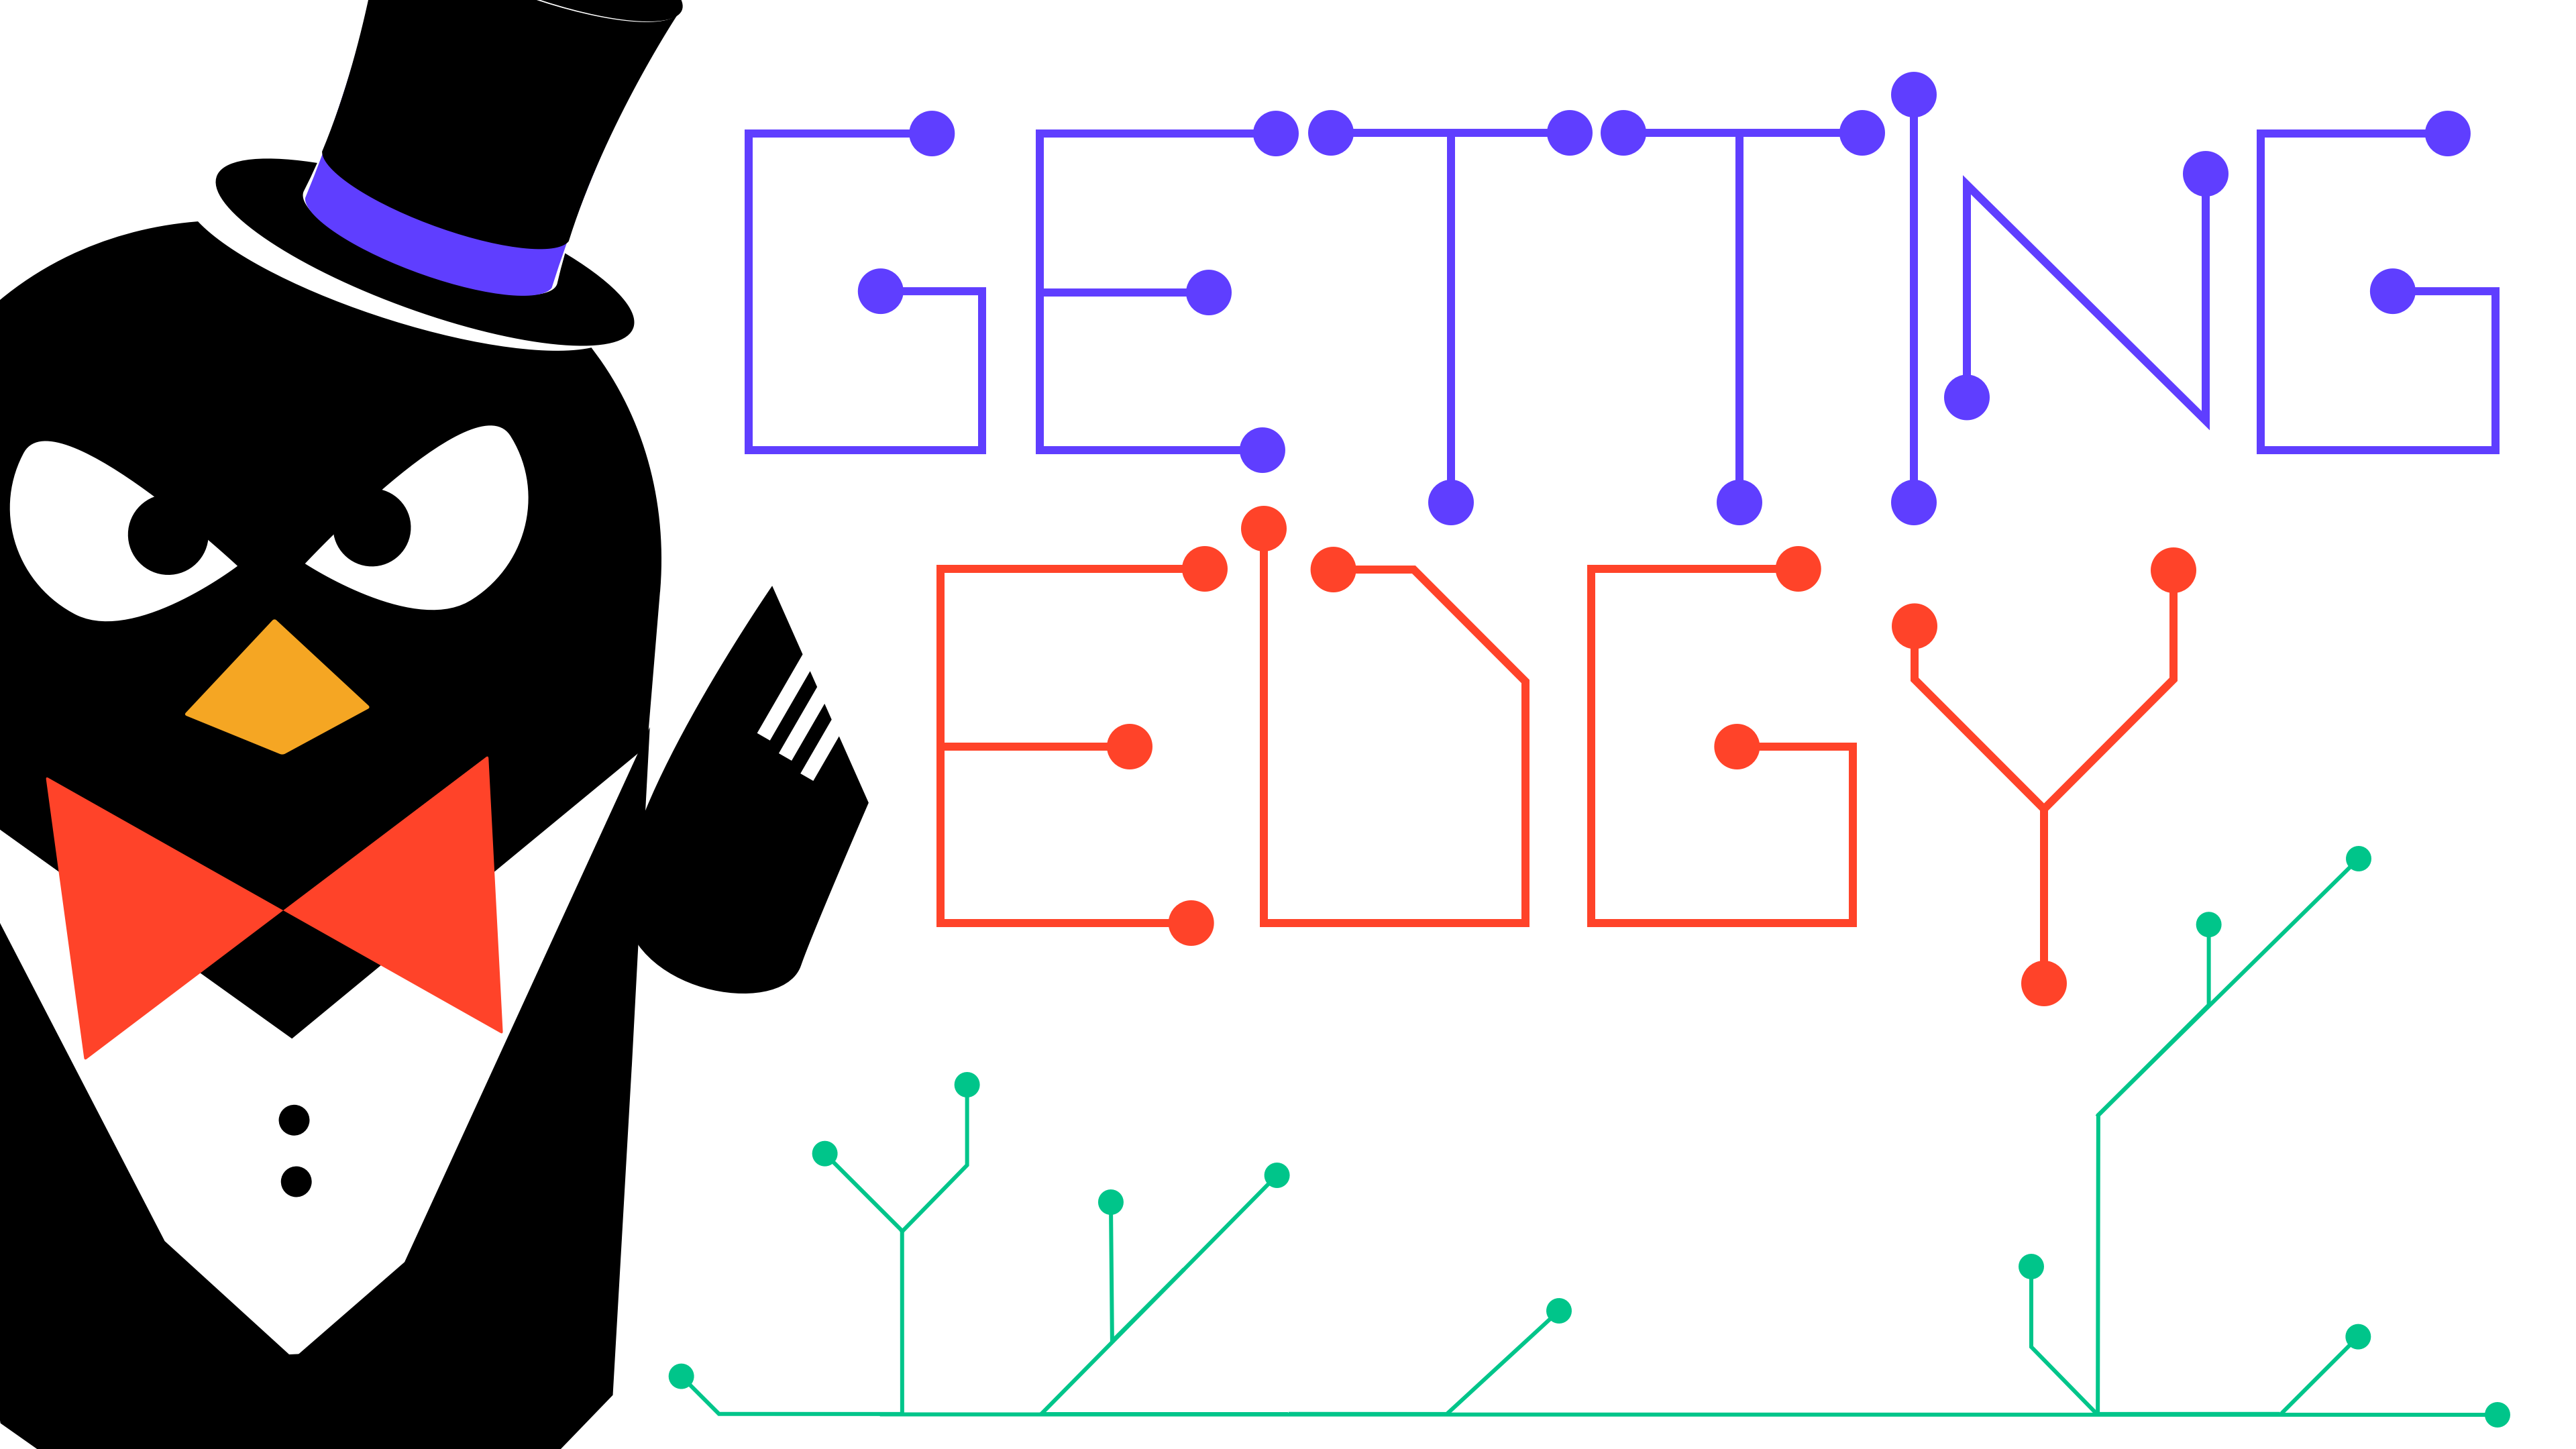 Thumbnail for resource: "Getting Edgy: What is Serverless?"